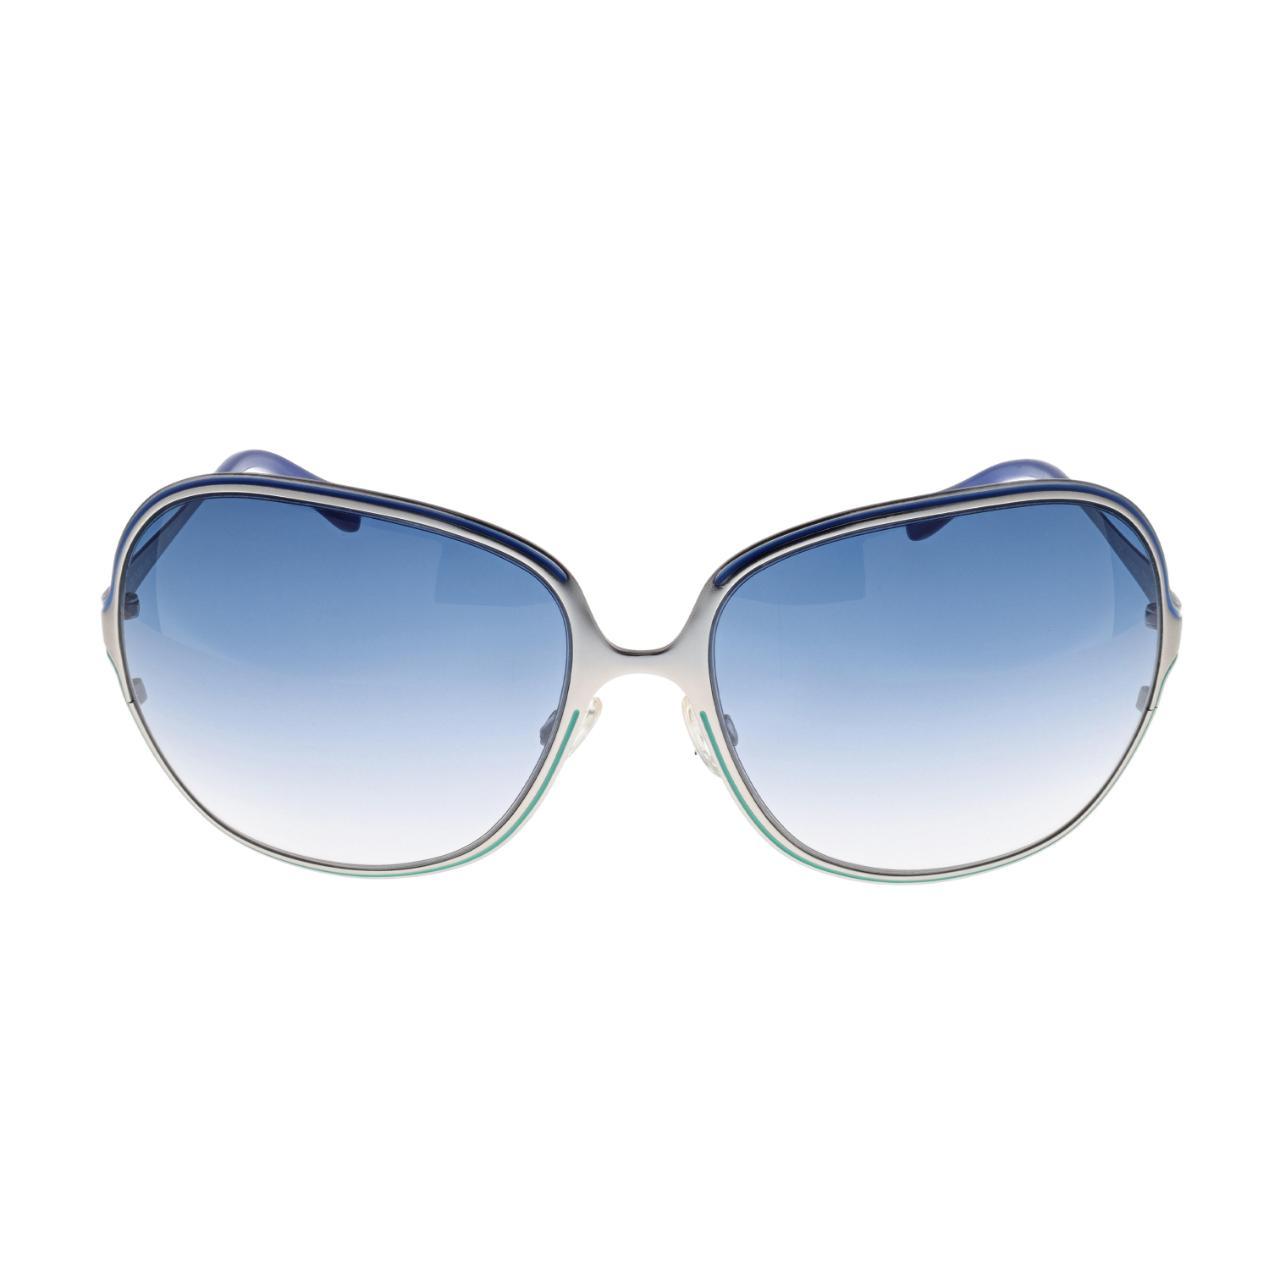 Oliver Peoples Women's Silver and Blue Sunglasses (2)